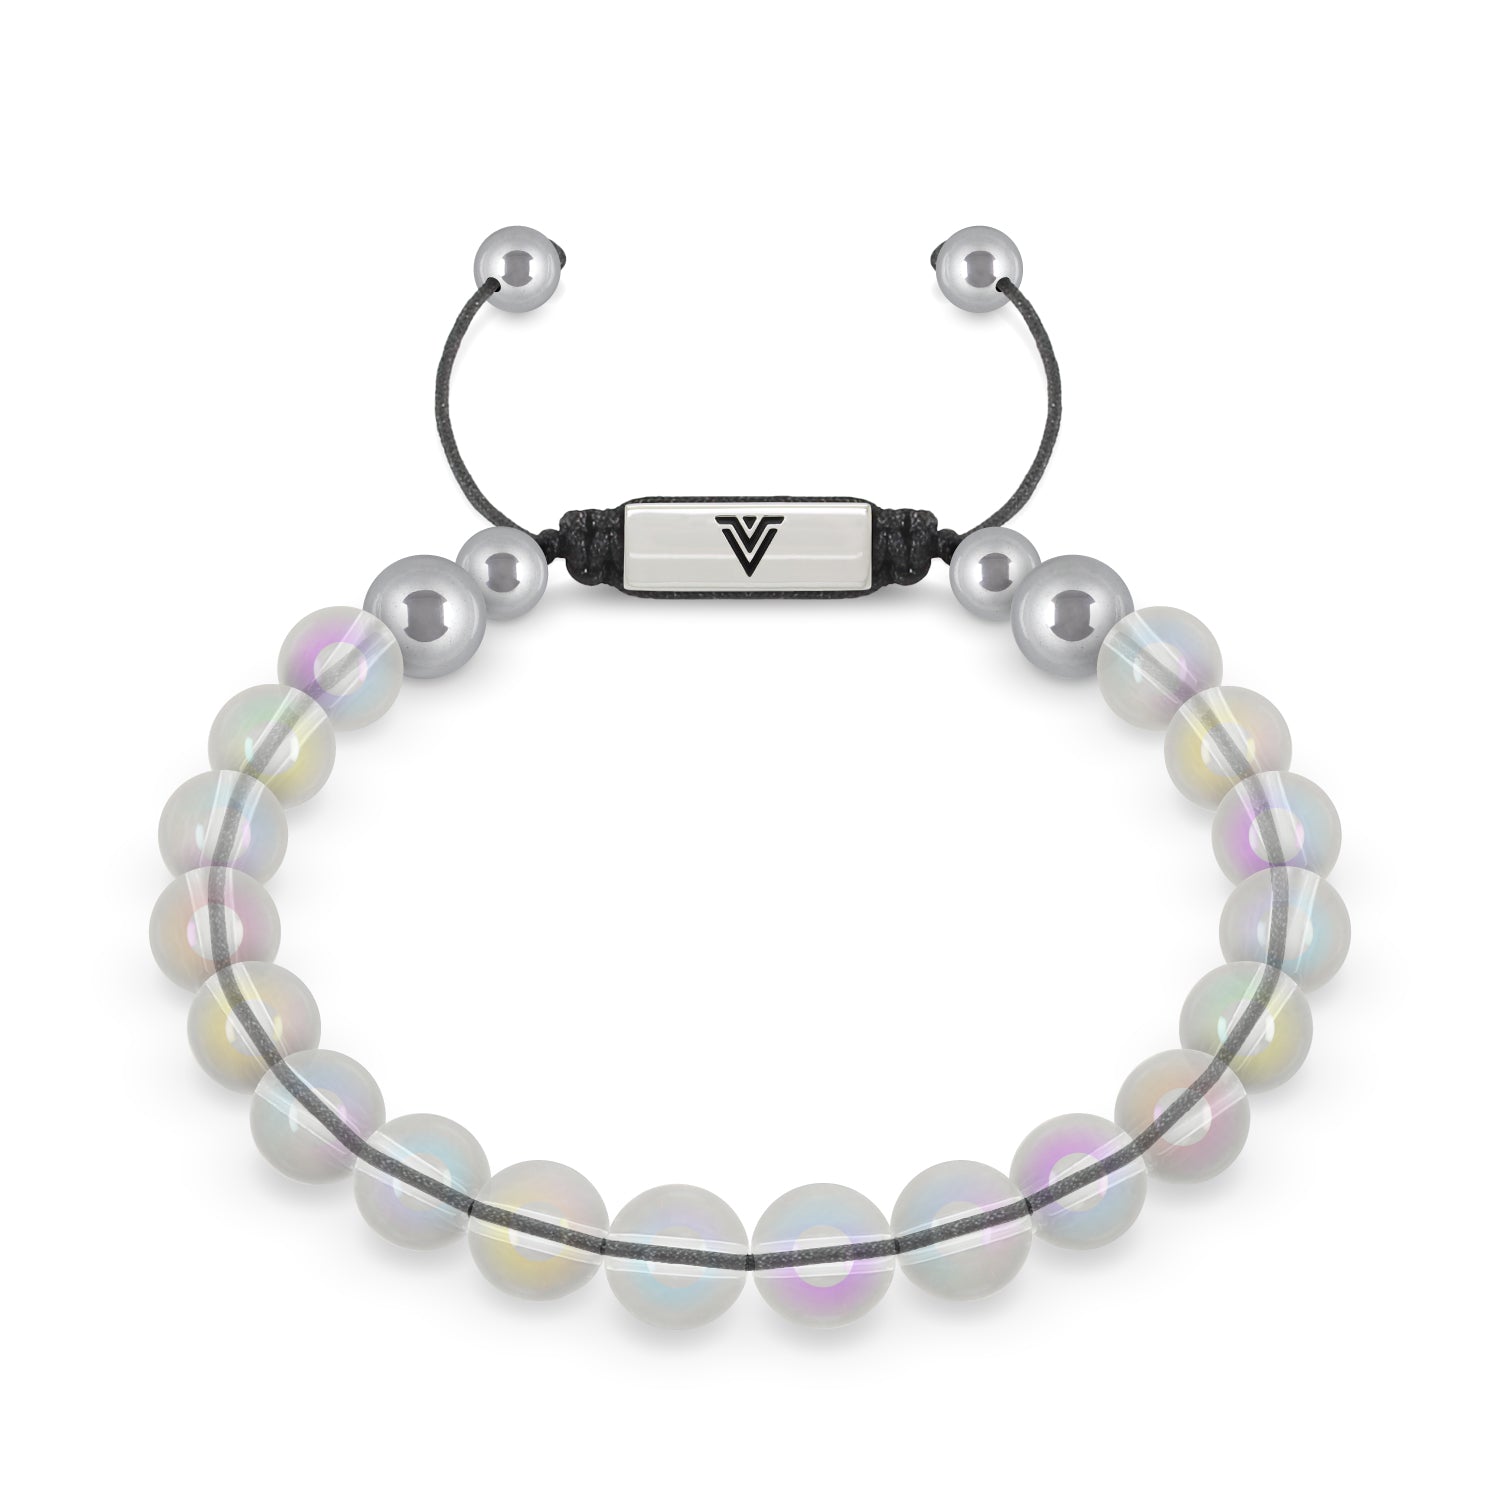 Front view of an 8mm Angel Aura Quartz beaded shamballa bracelet with silver stainless steel logo bead made by Voltlin